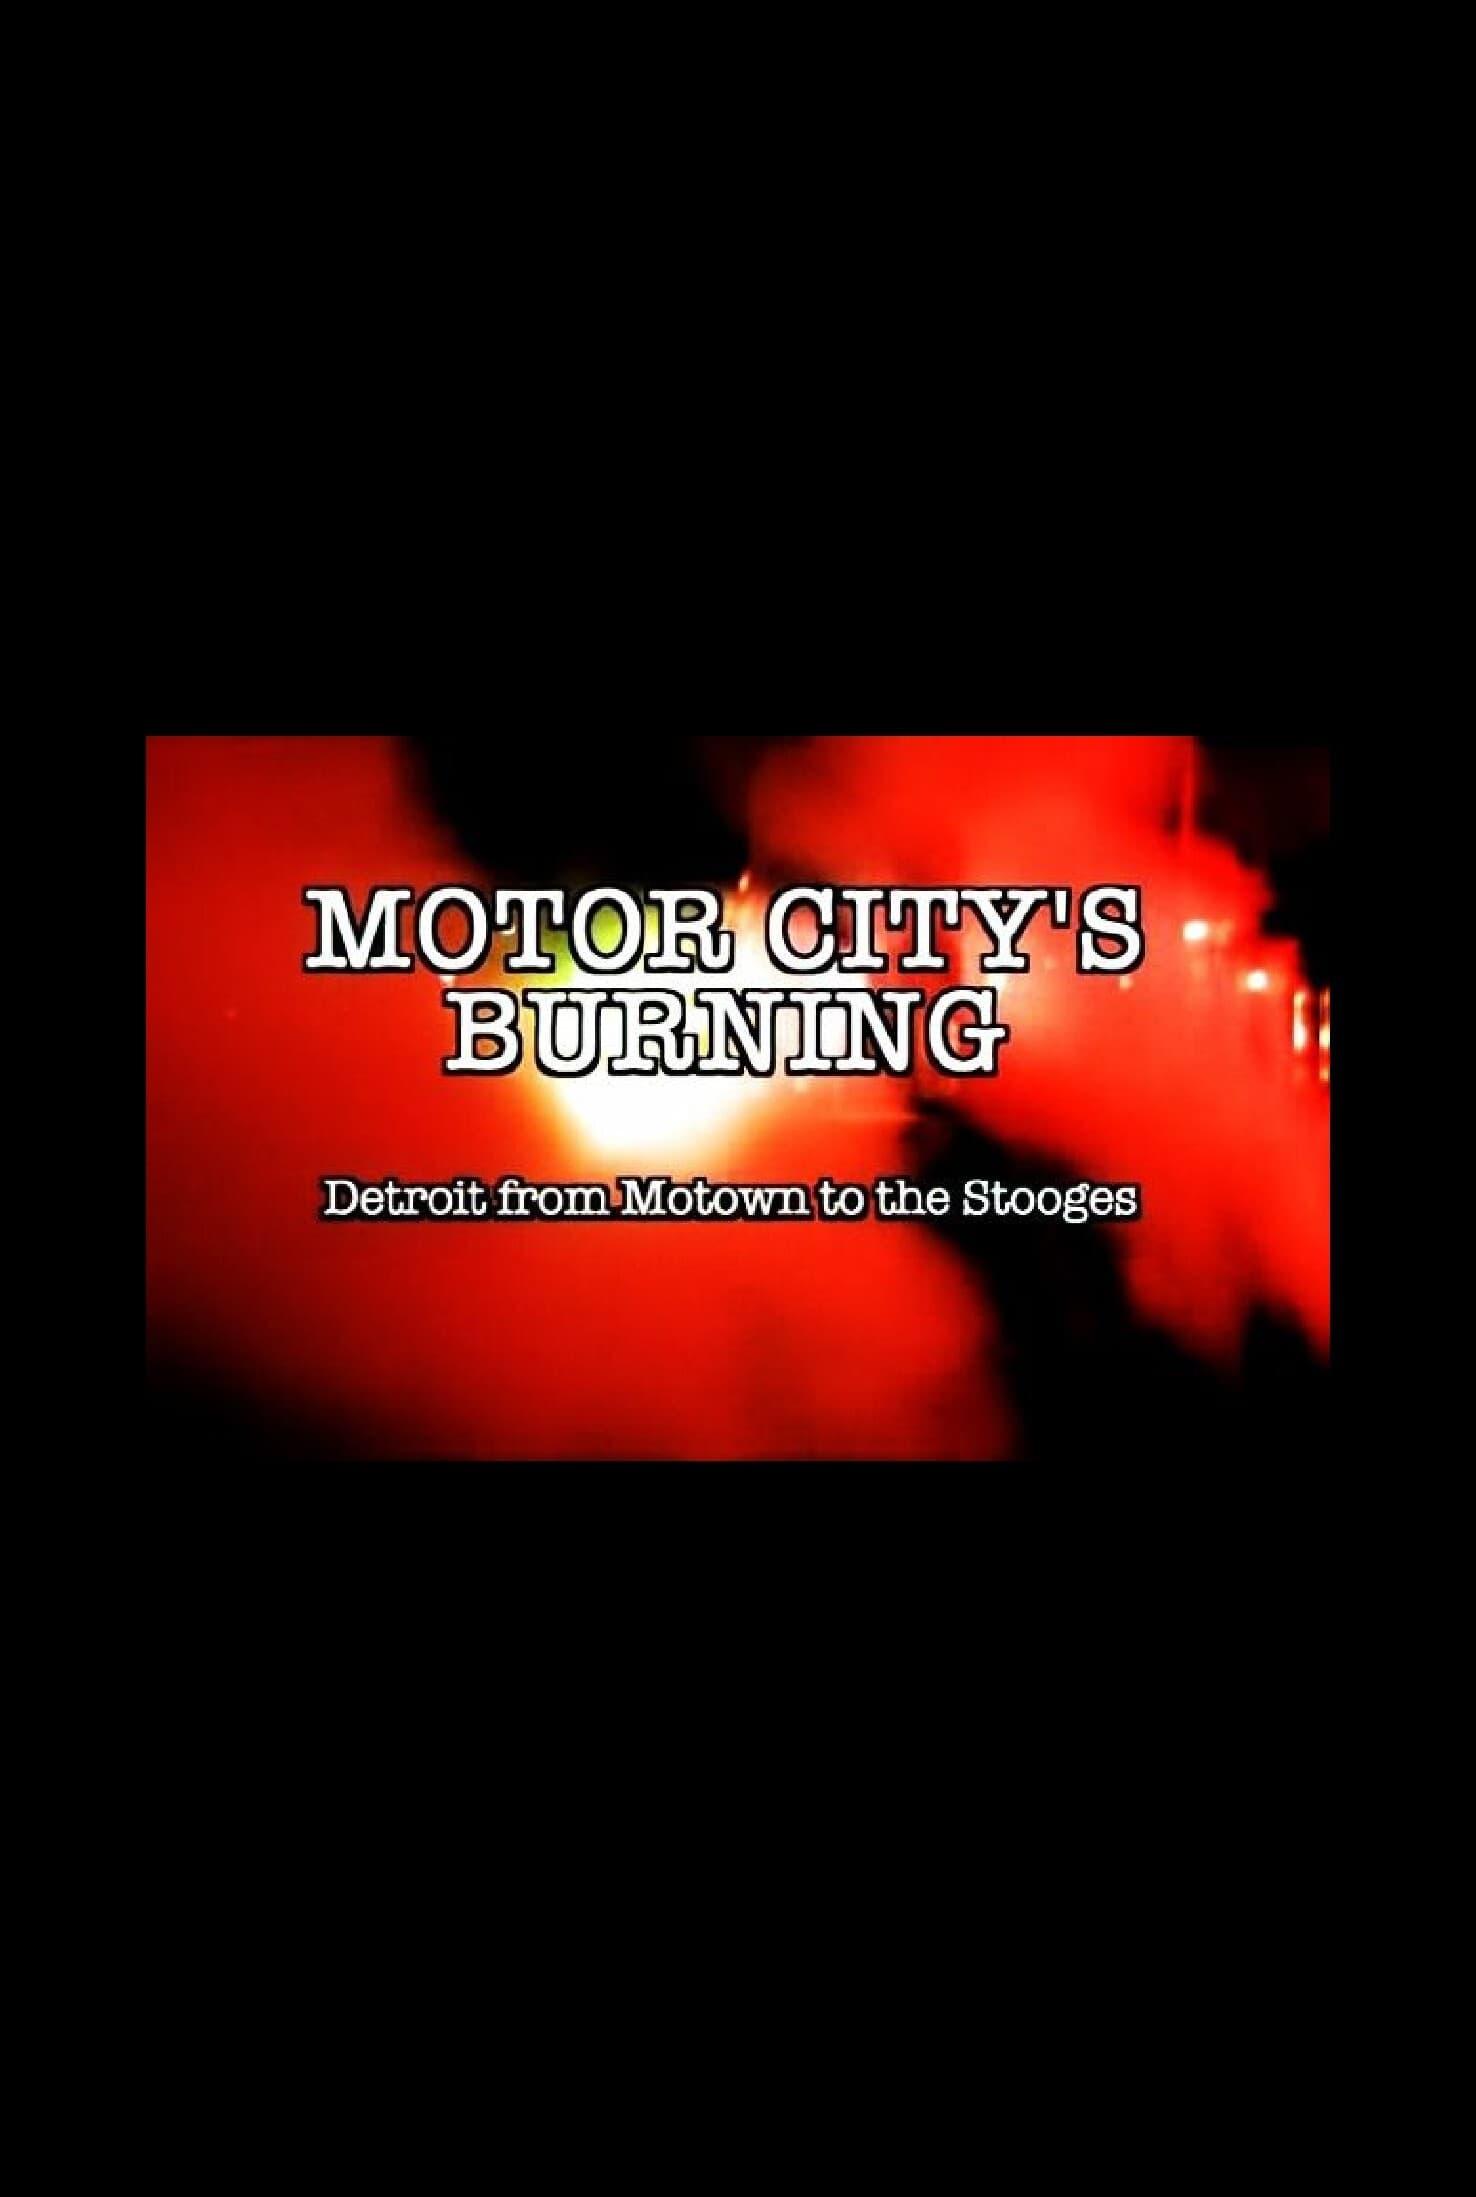 Motor City's Burning: Detroit from Motown to the Stooges poster